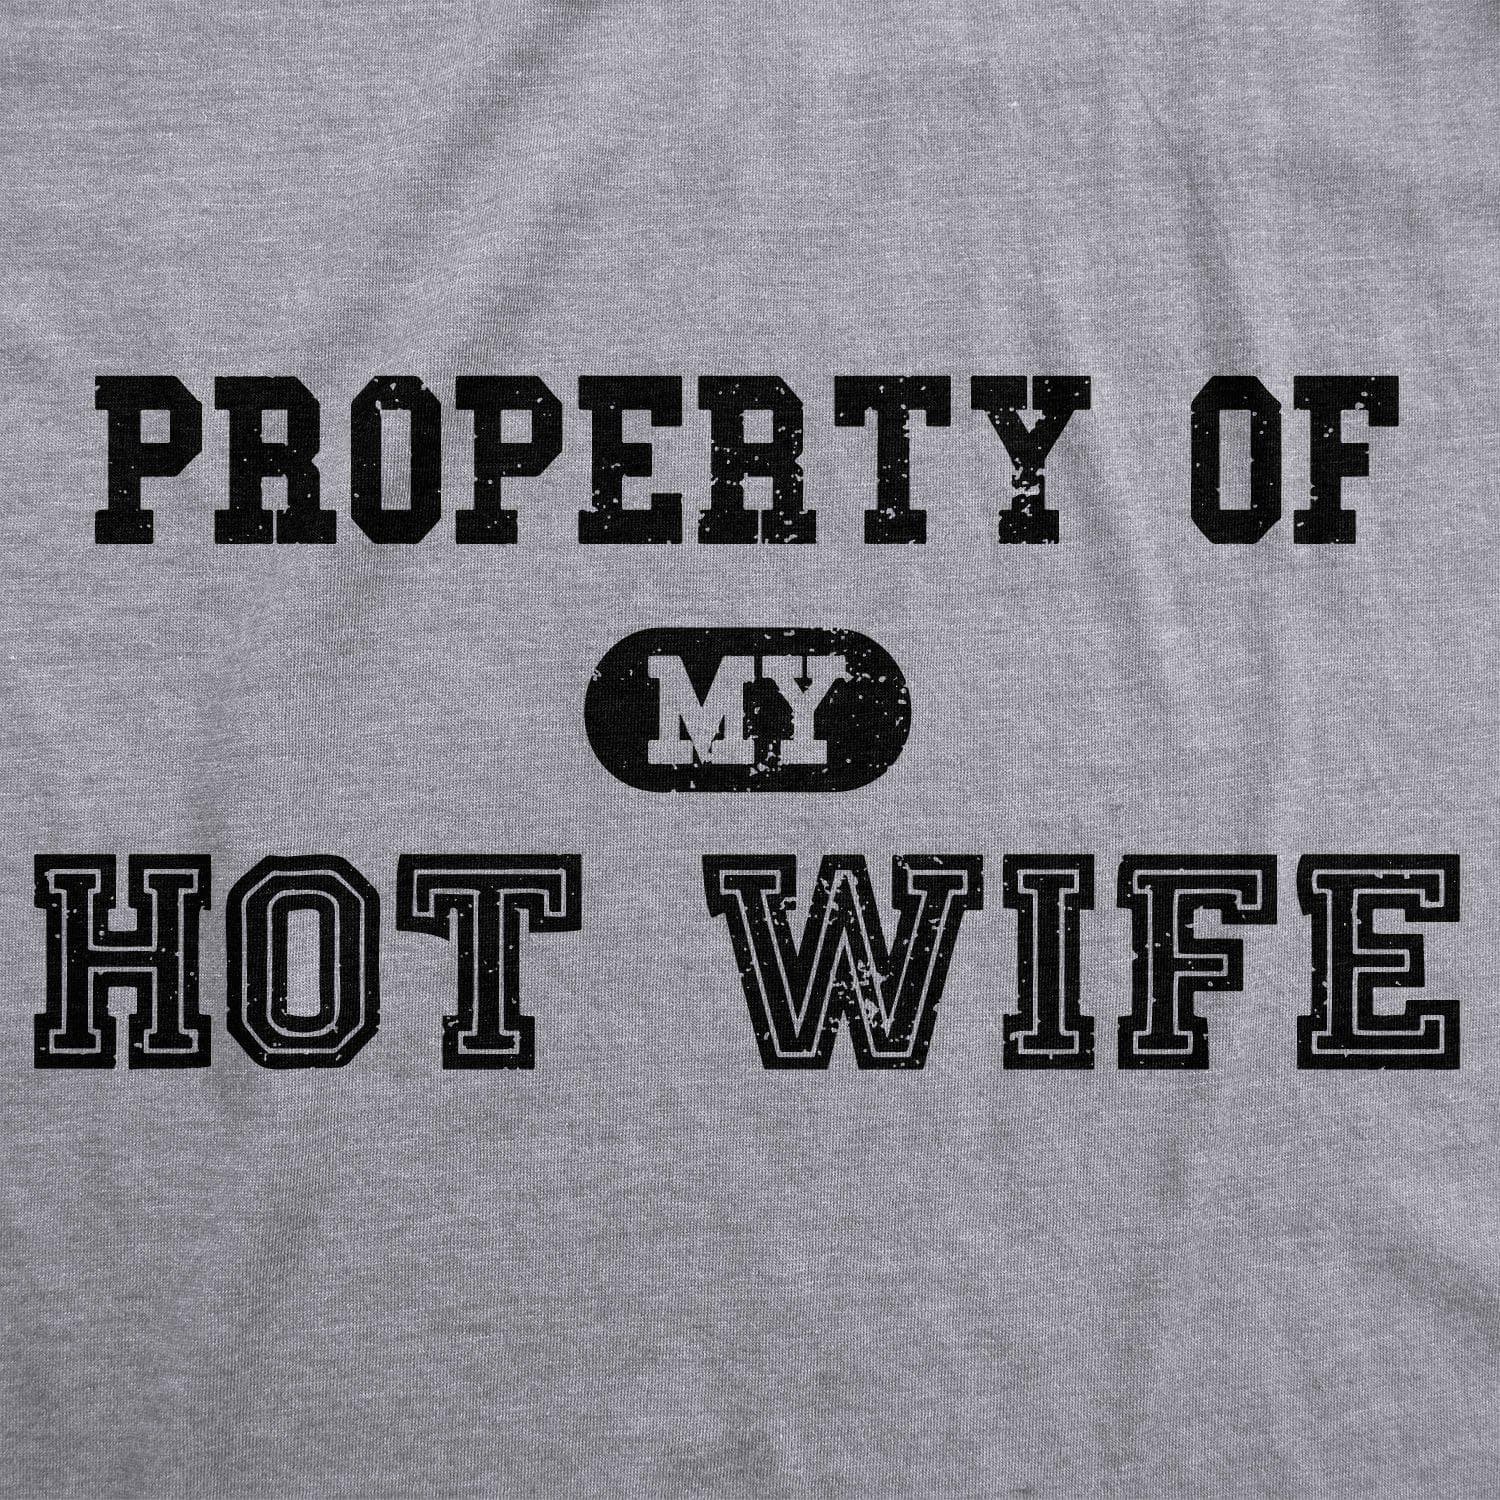 Property of My Hot Wife Men's Tshirt  -  Crazy Dog T-Shirts